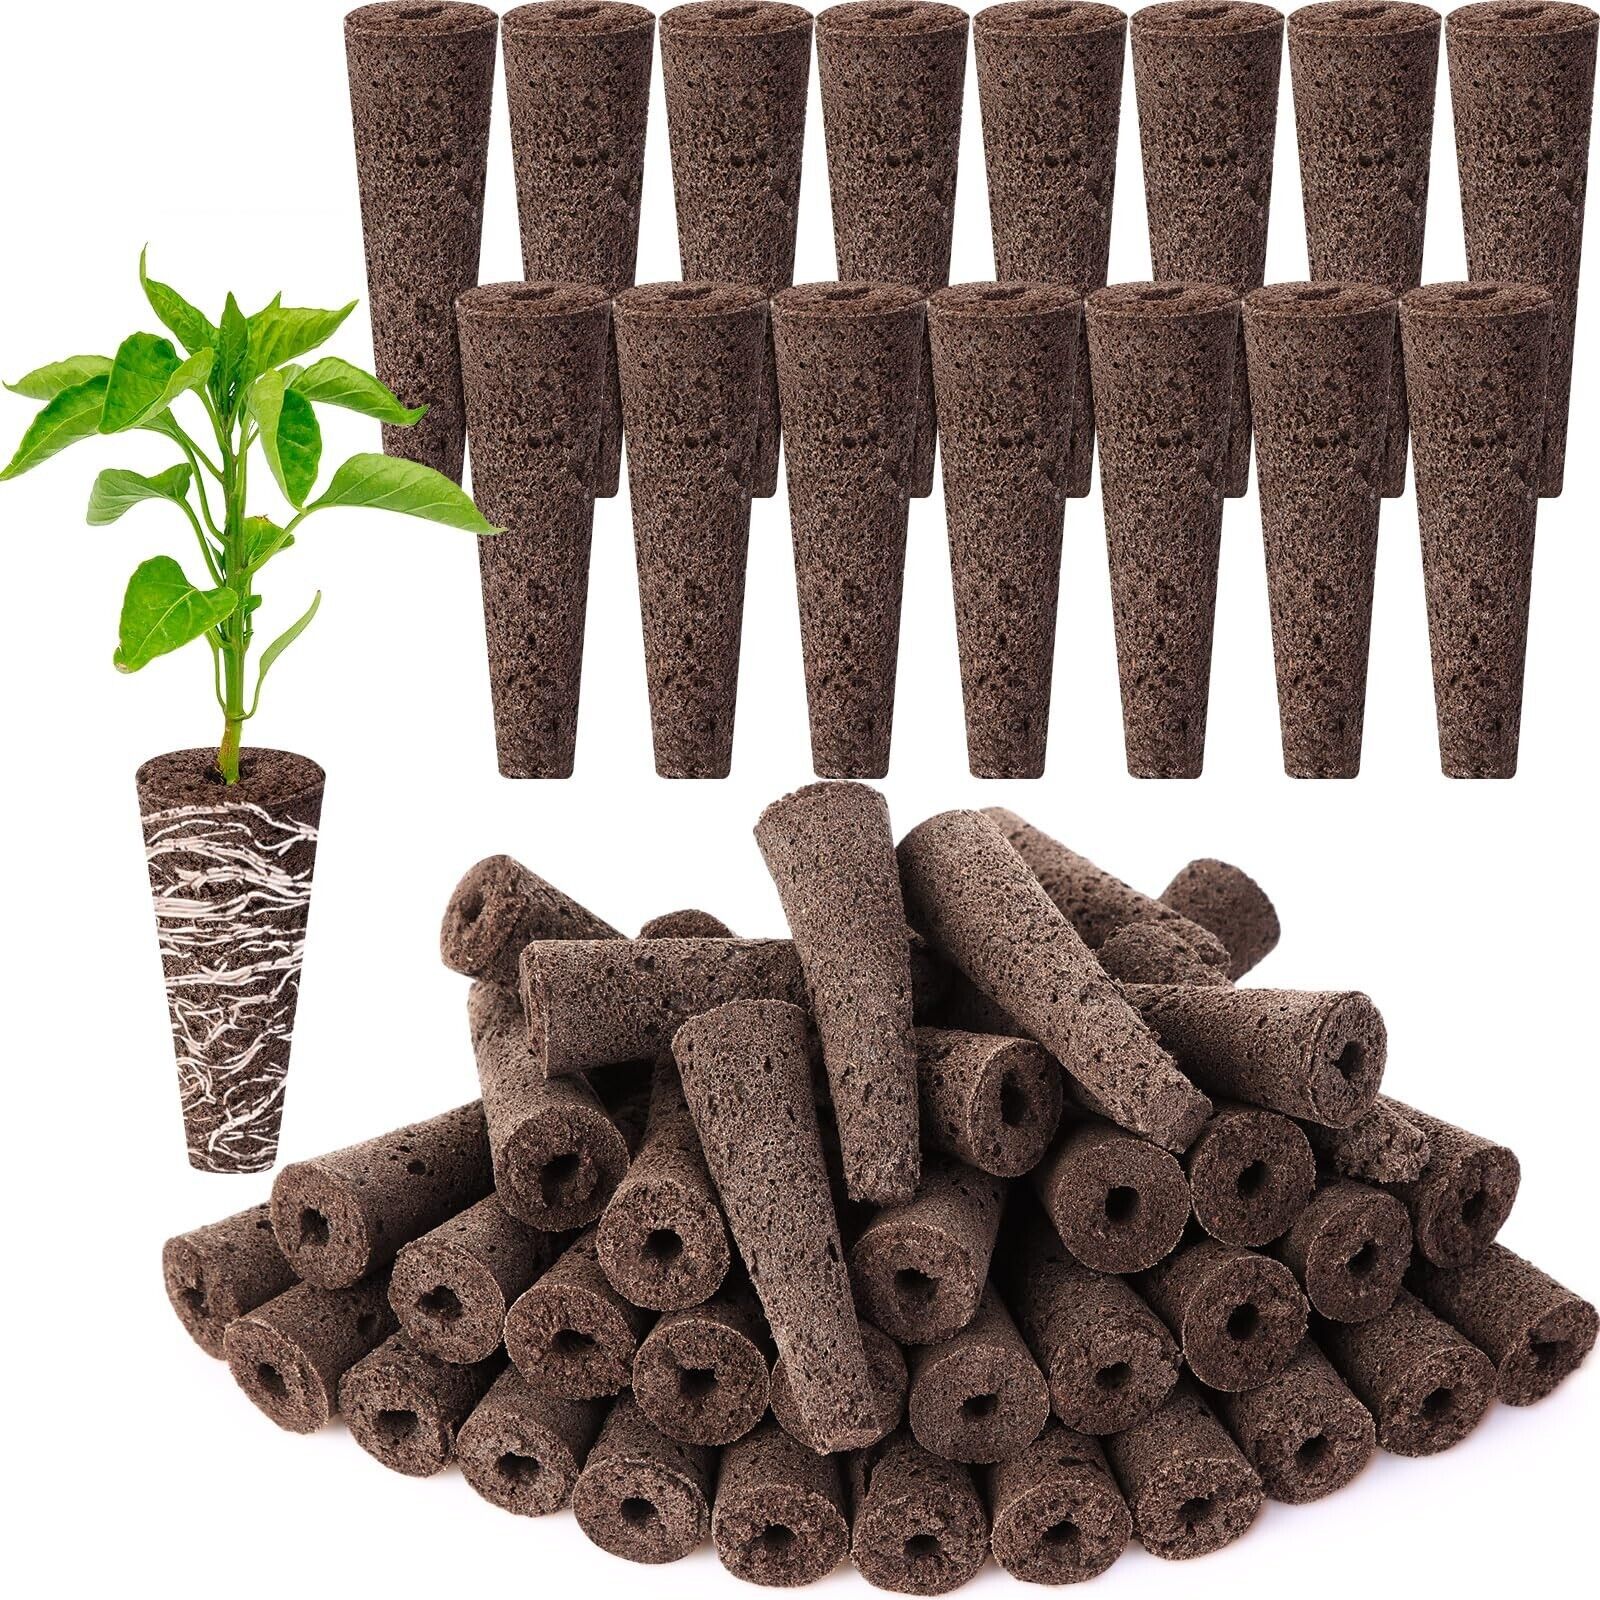 150 Pcs Grow Sponges Bulk Replacement Root Growth Sponges Seed Growing Starte...